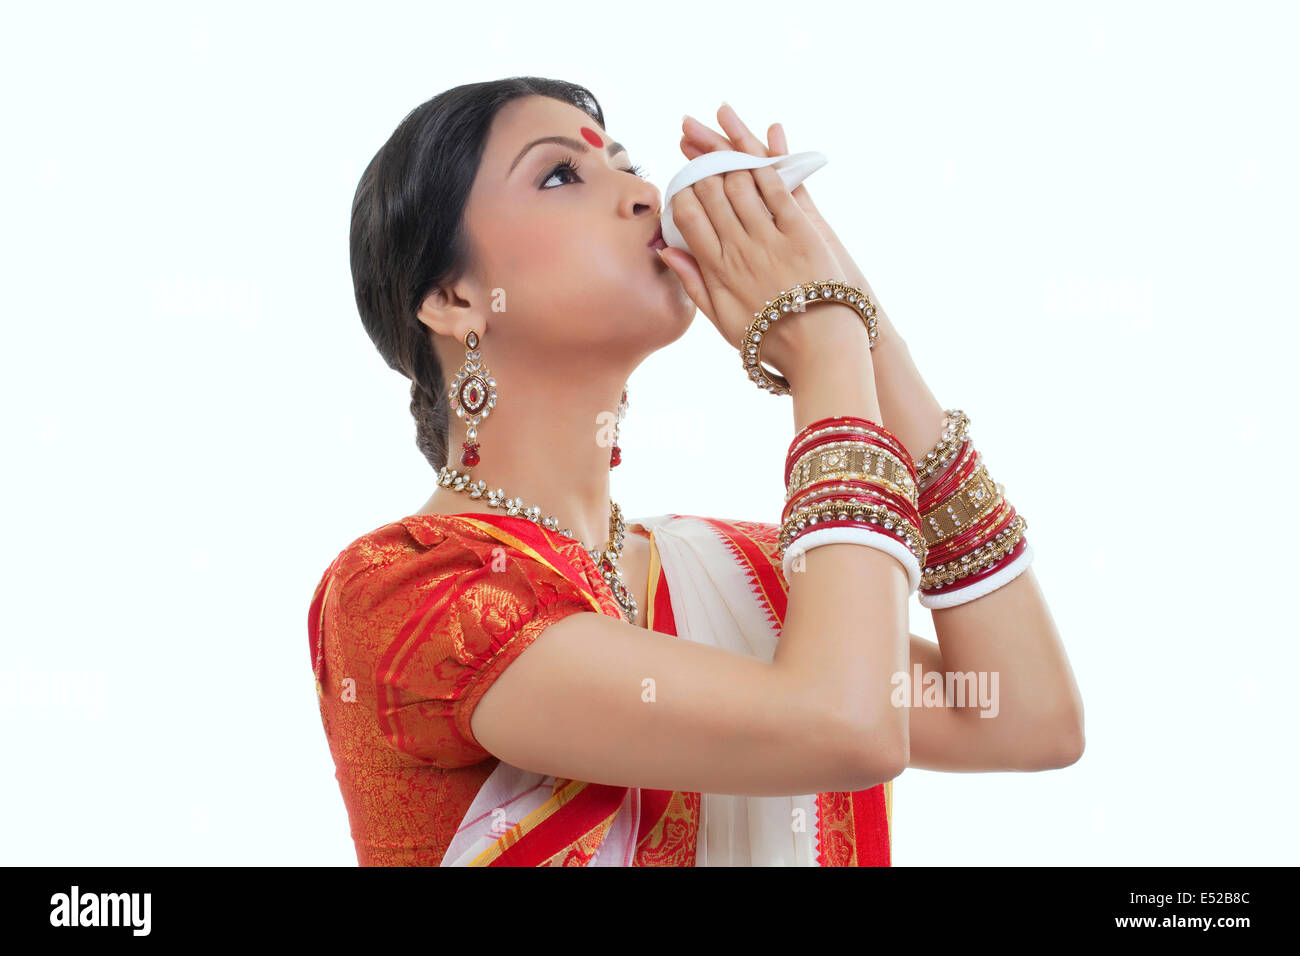 Bengali woman blowing on a conch shell Stock Photo